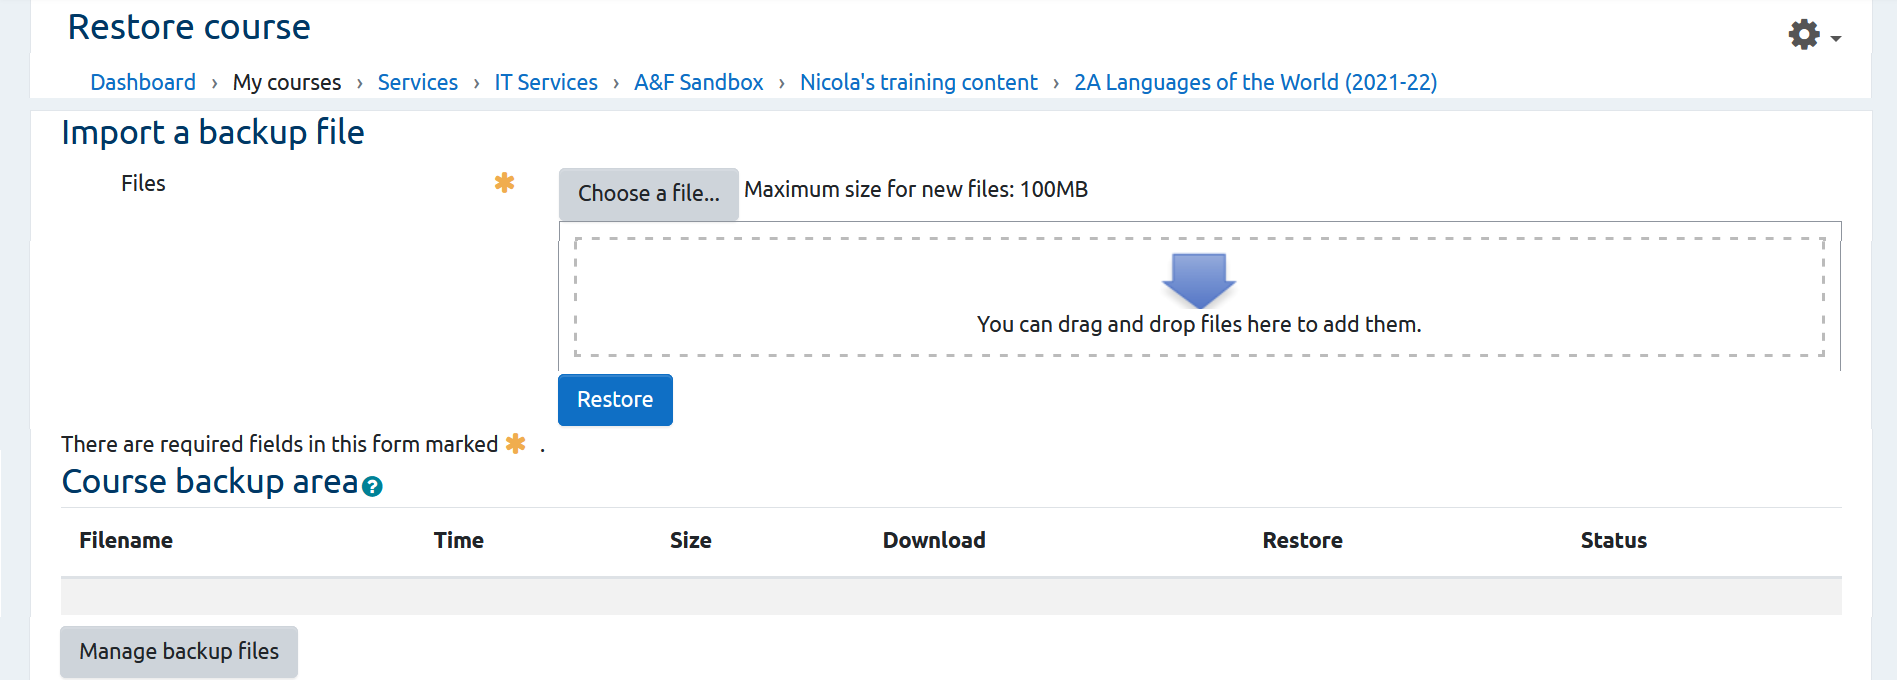 A screenshot of the 'Restore course' area on Moodle, with the sections 'Import a backup file' and 'Course backup area' visible.